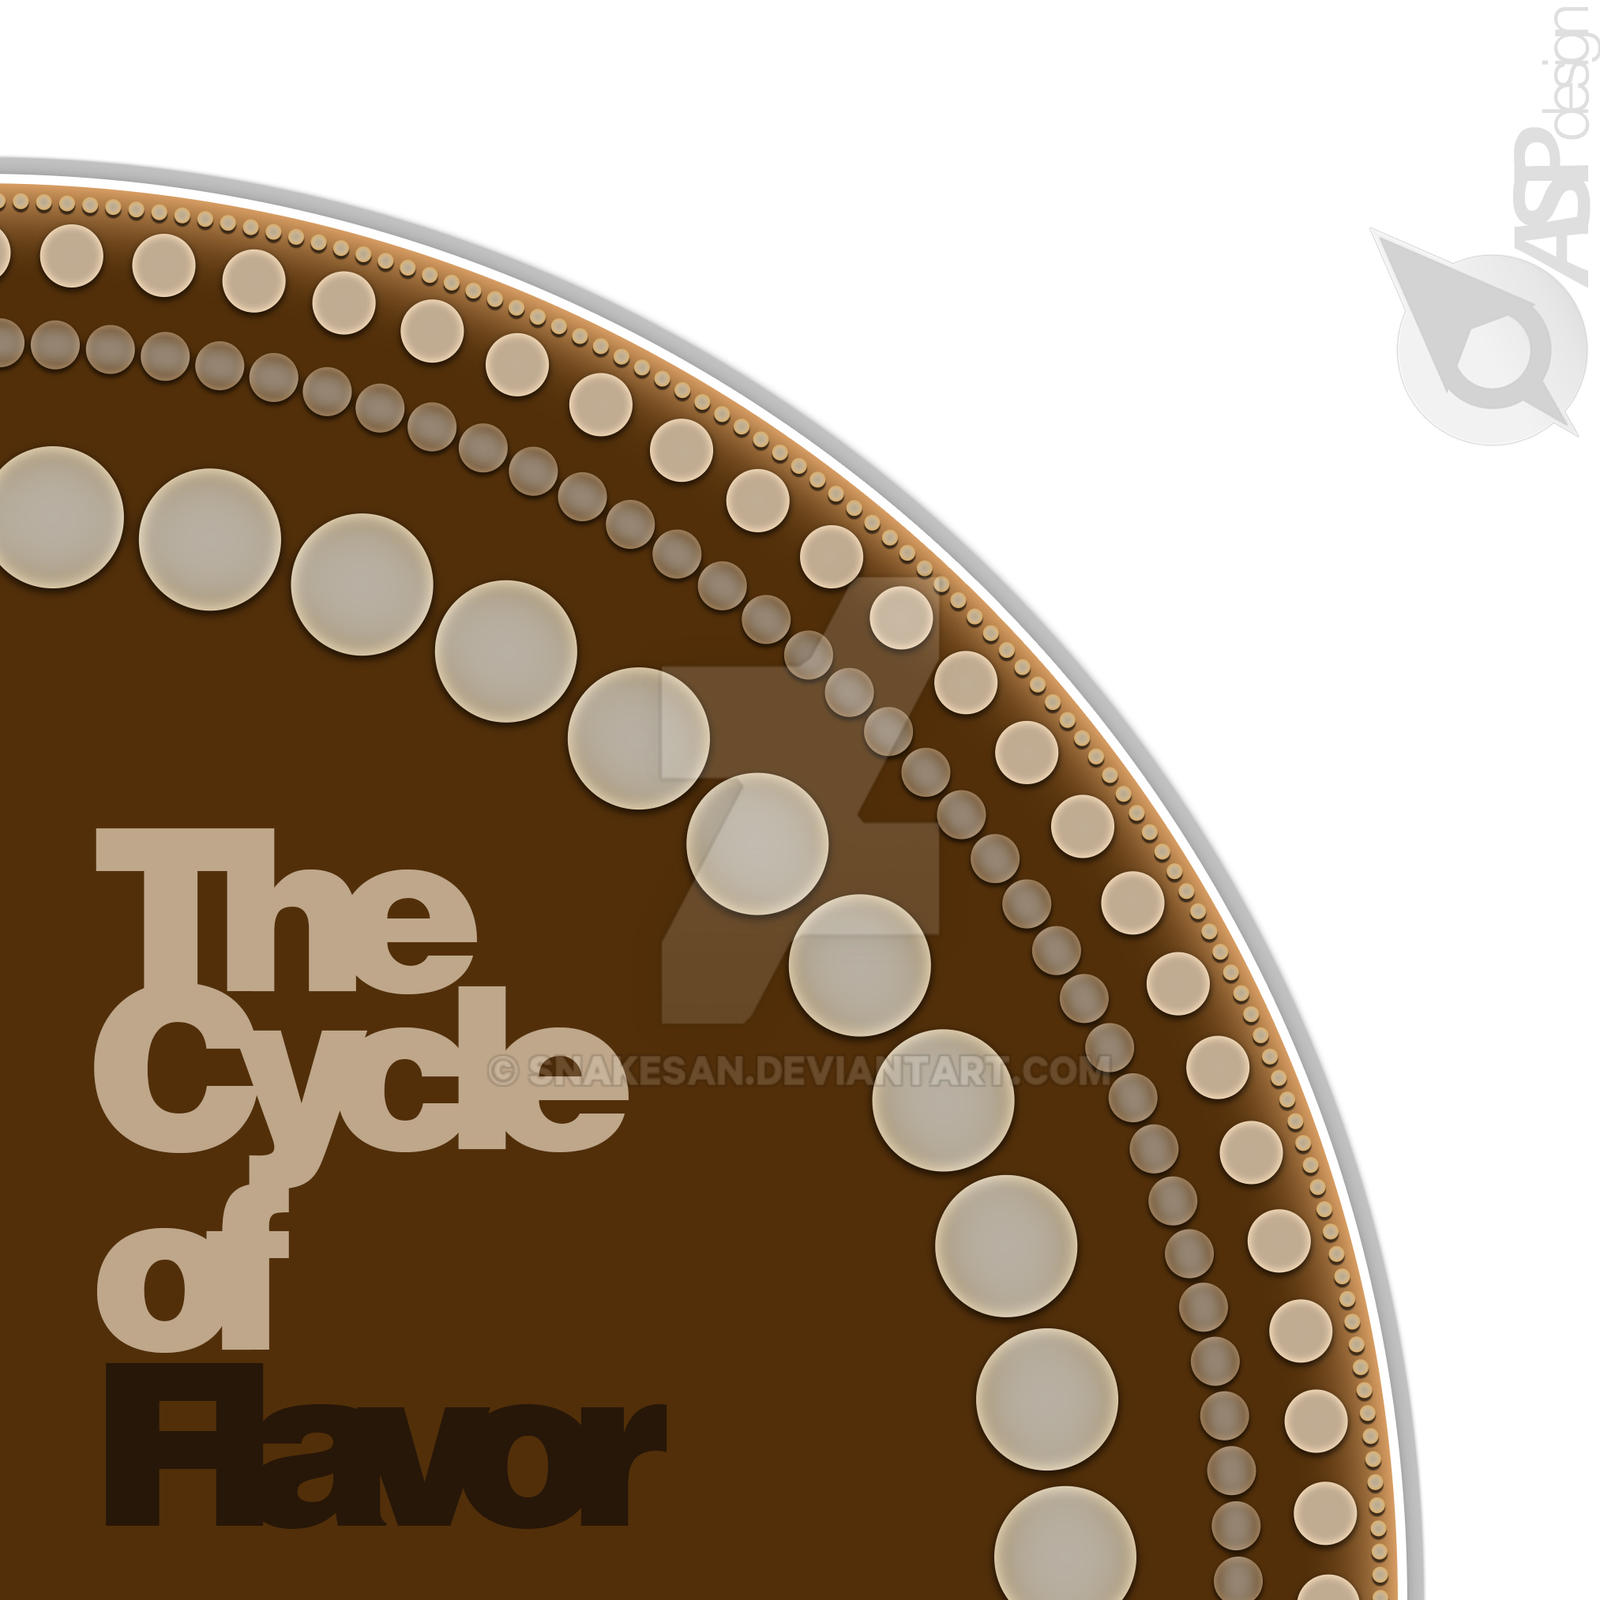 CycleOfFlavors - CD/Book Cover Project